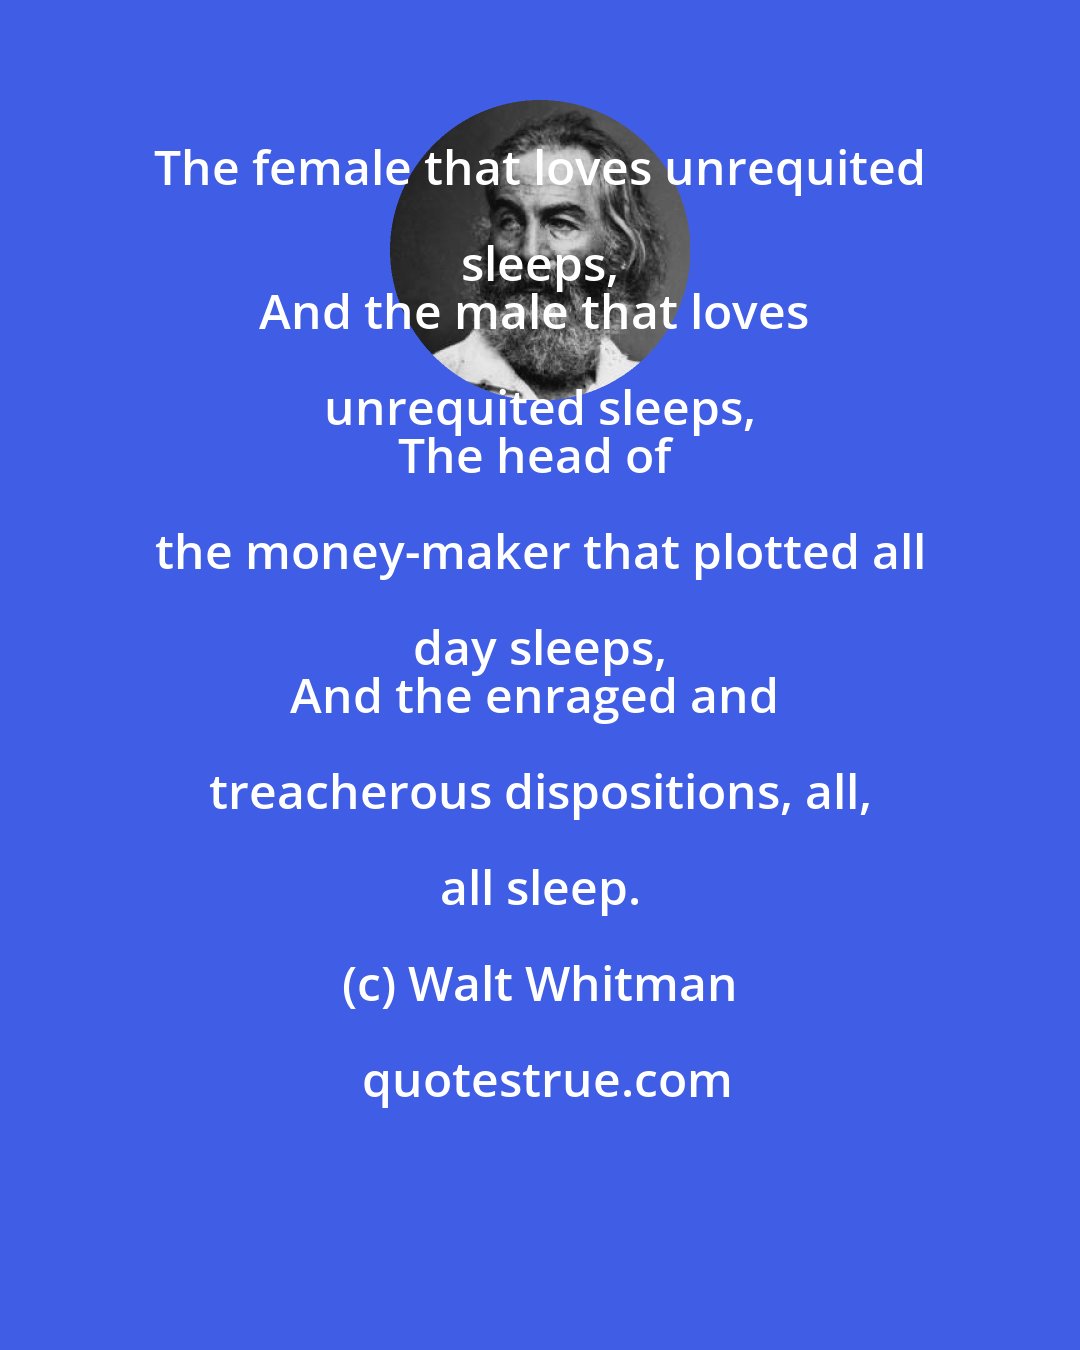 Walt Whitman: The female that loves unrequited sleeps, 
And the male that loves unrequited sleeps, 
The head of the money-maker that plotted all day sleeps, 
And the enraged and treacherous dispositions, all, all sleep.